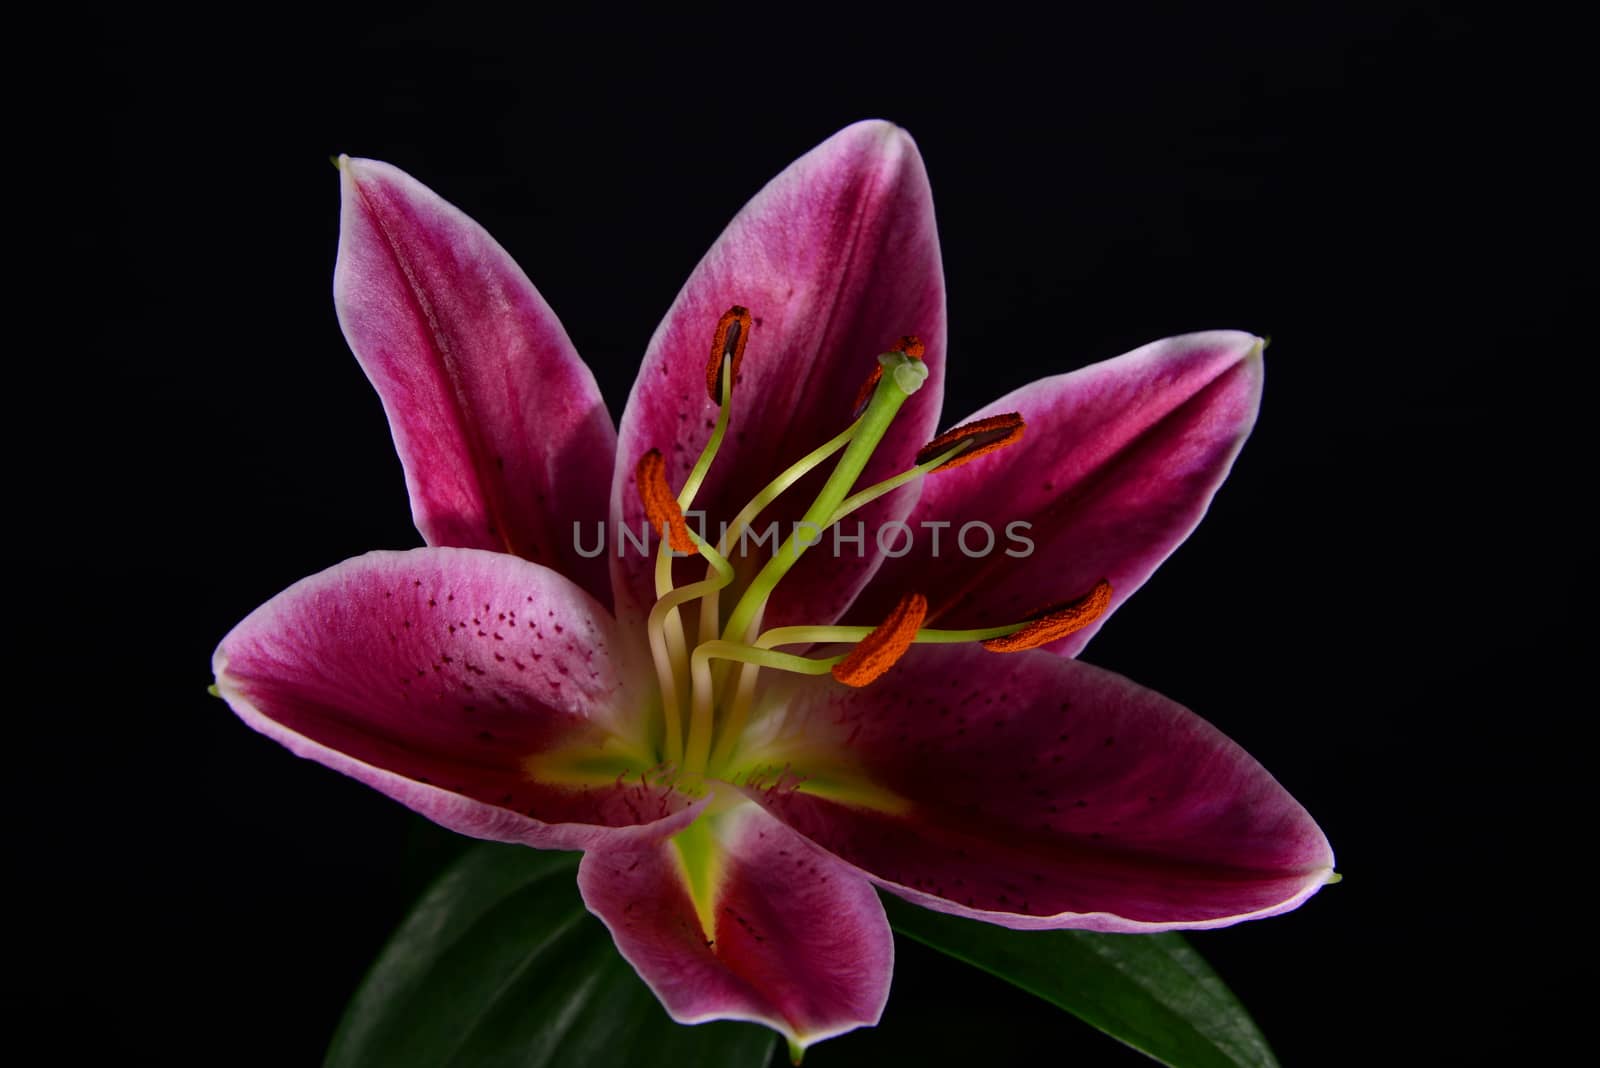 purple lily on a black background by dk_photos